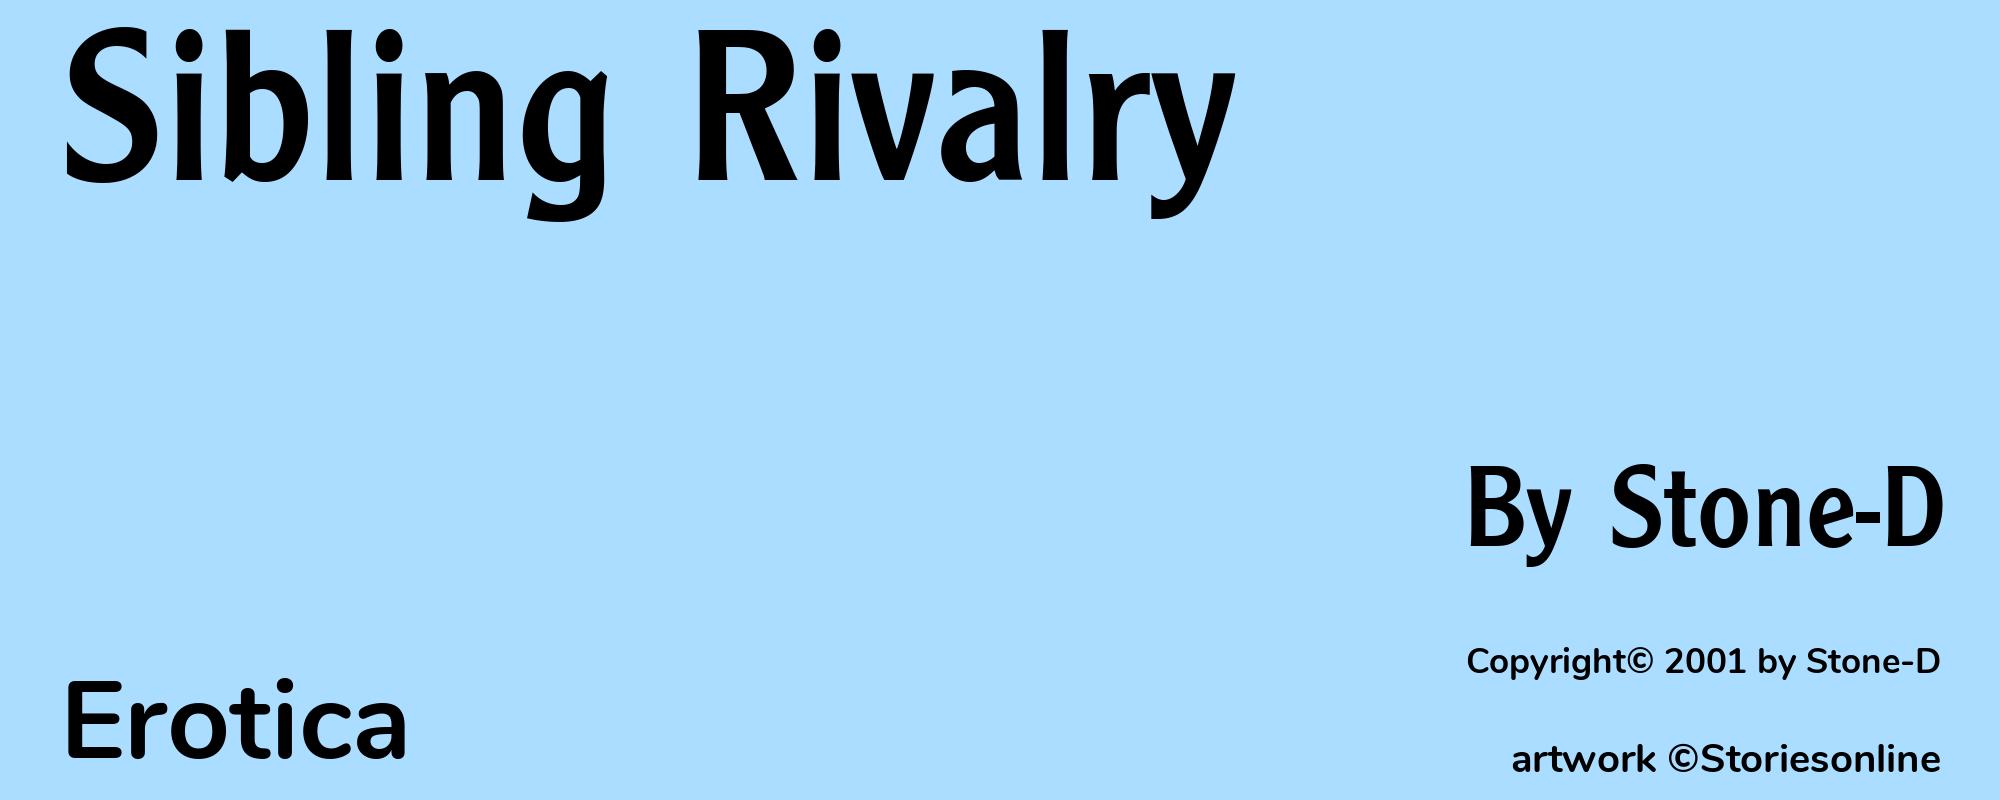 Sibling Rivalry - Cover